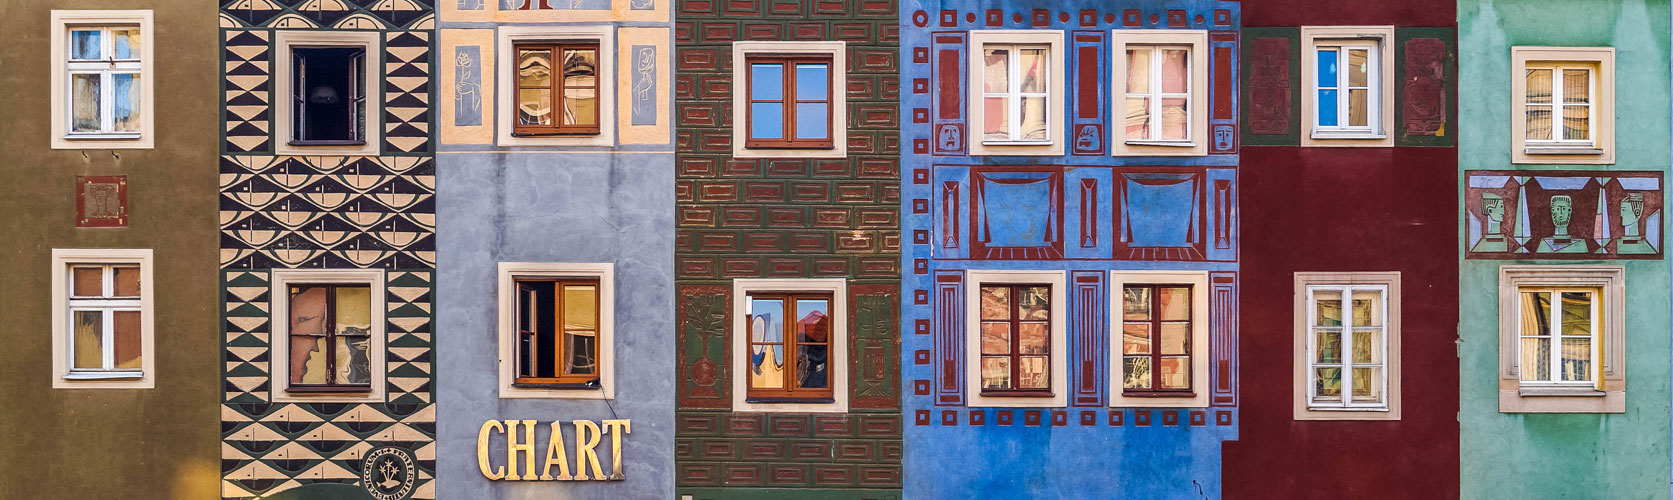 Just Windows, © Emre Korhan Tuncer, I place, Discover Europe Photo Contest for Students